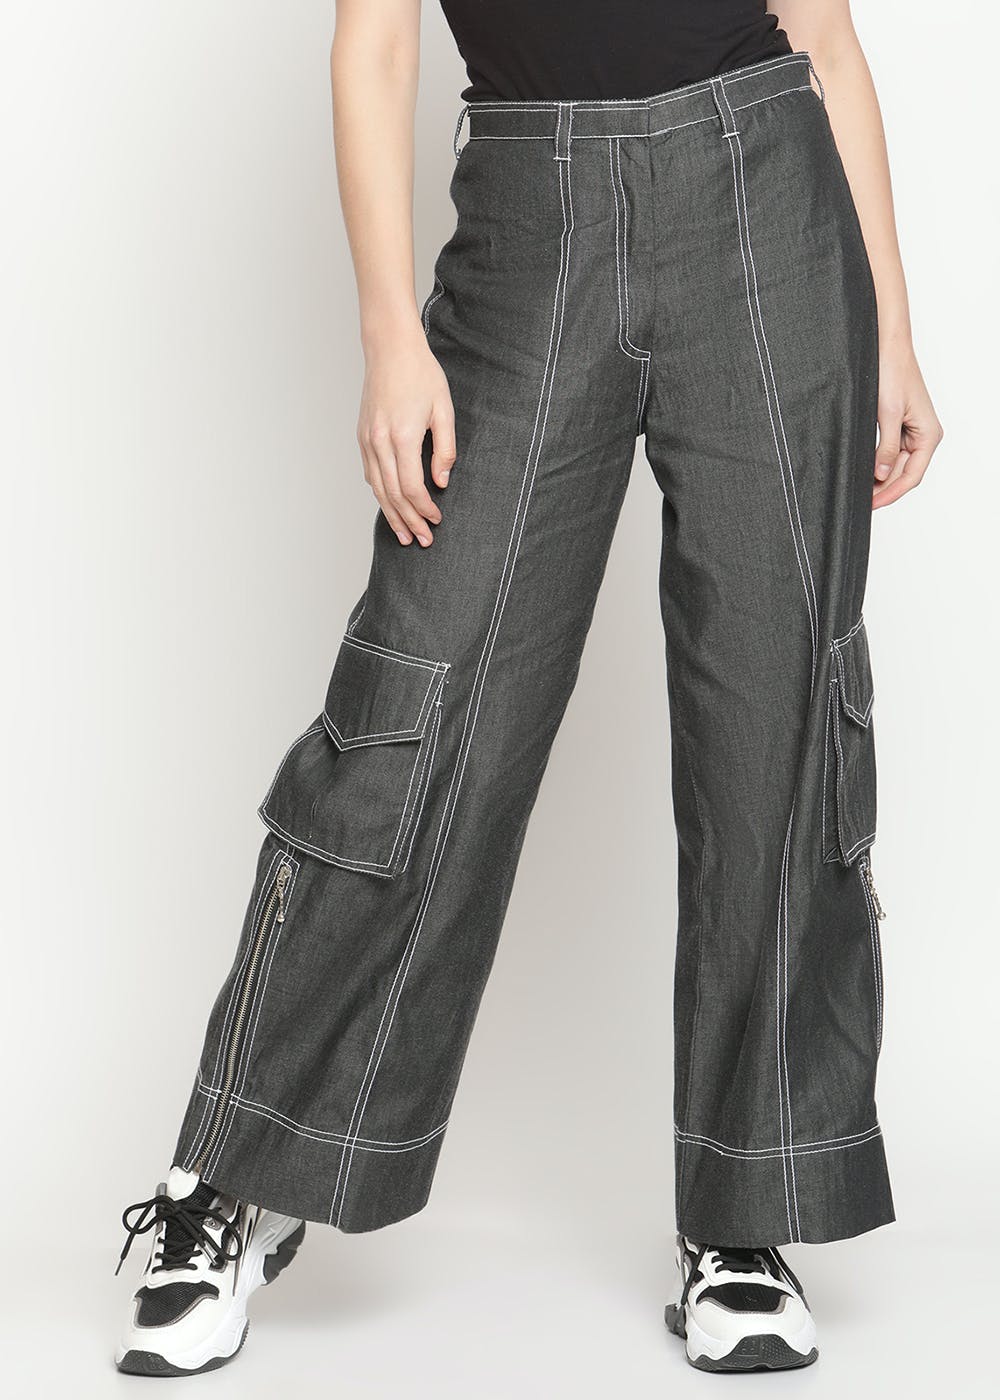 Women's Black Cargo Pants With White Detail Stitching – Luxxe Apparel